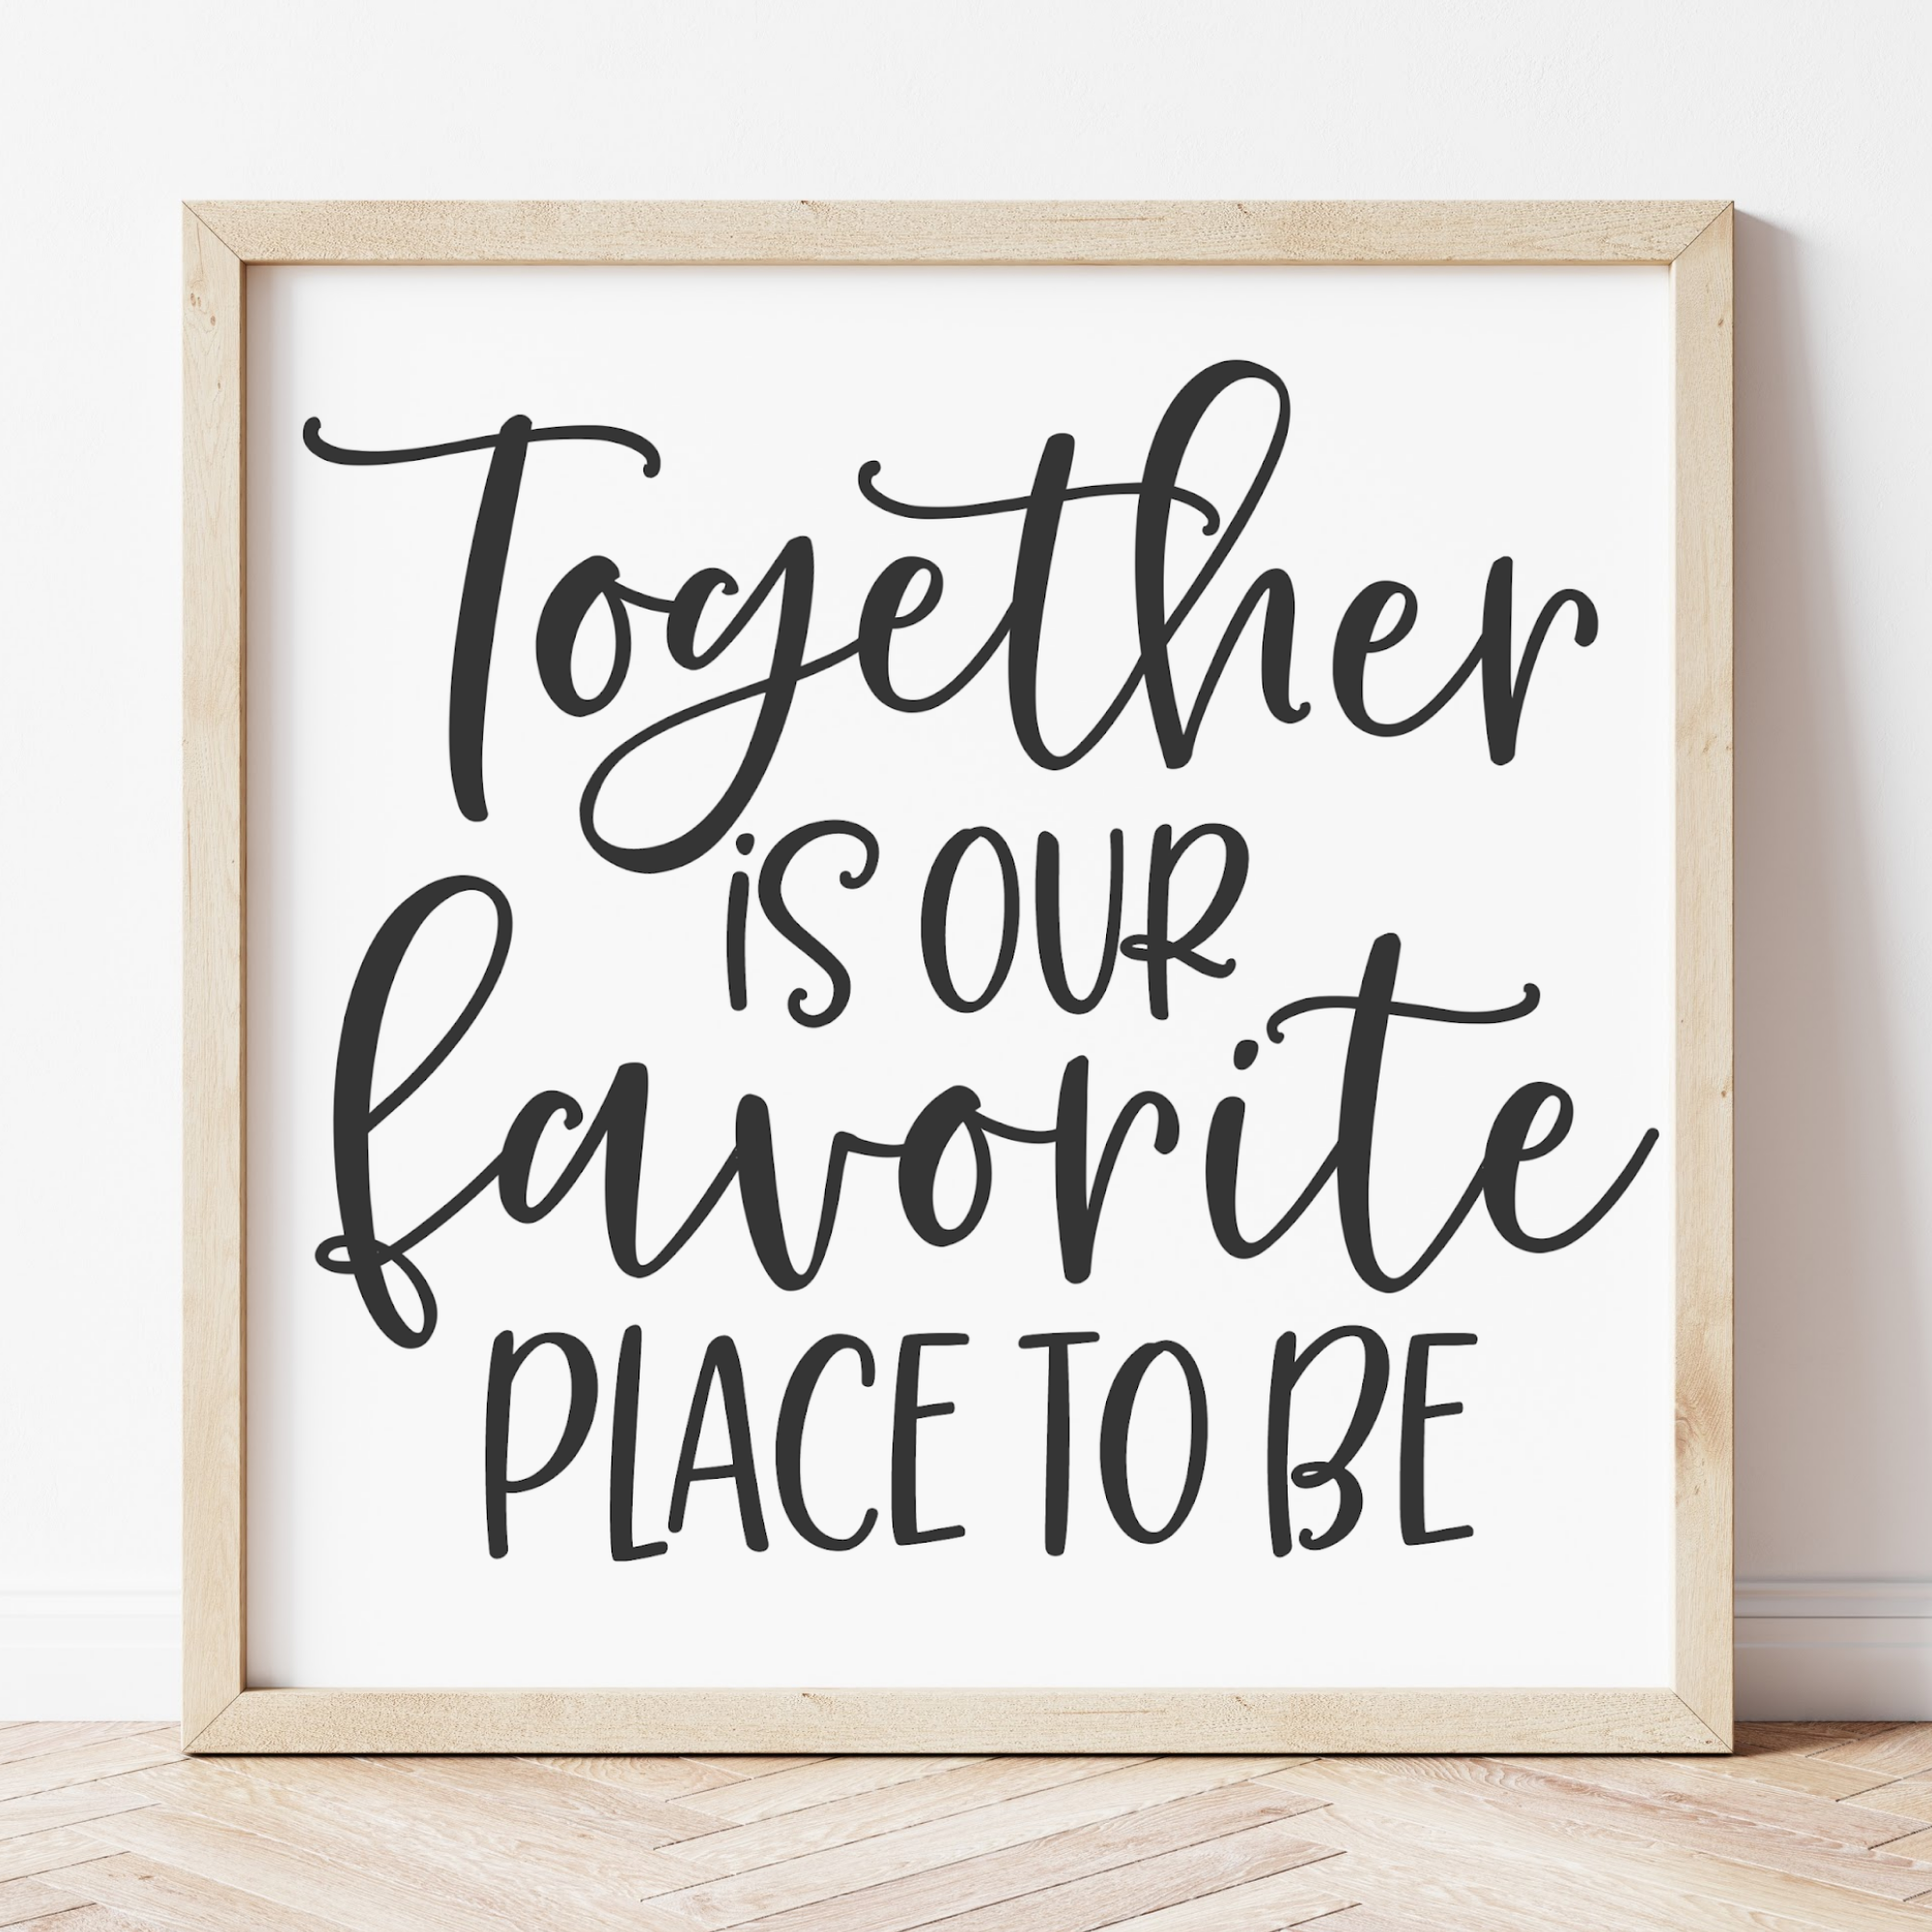 Together is Our Favorite Place To Be SVG Cut File